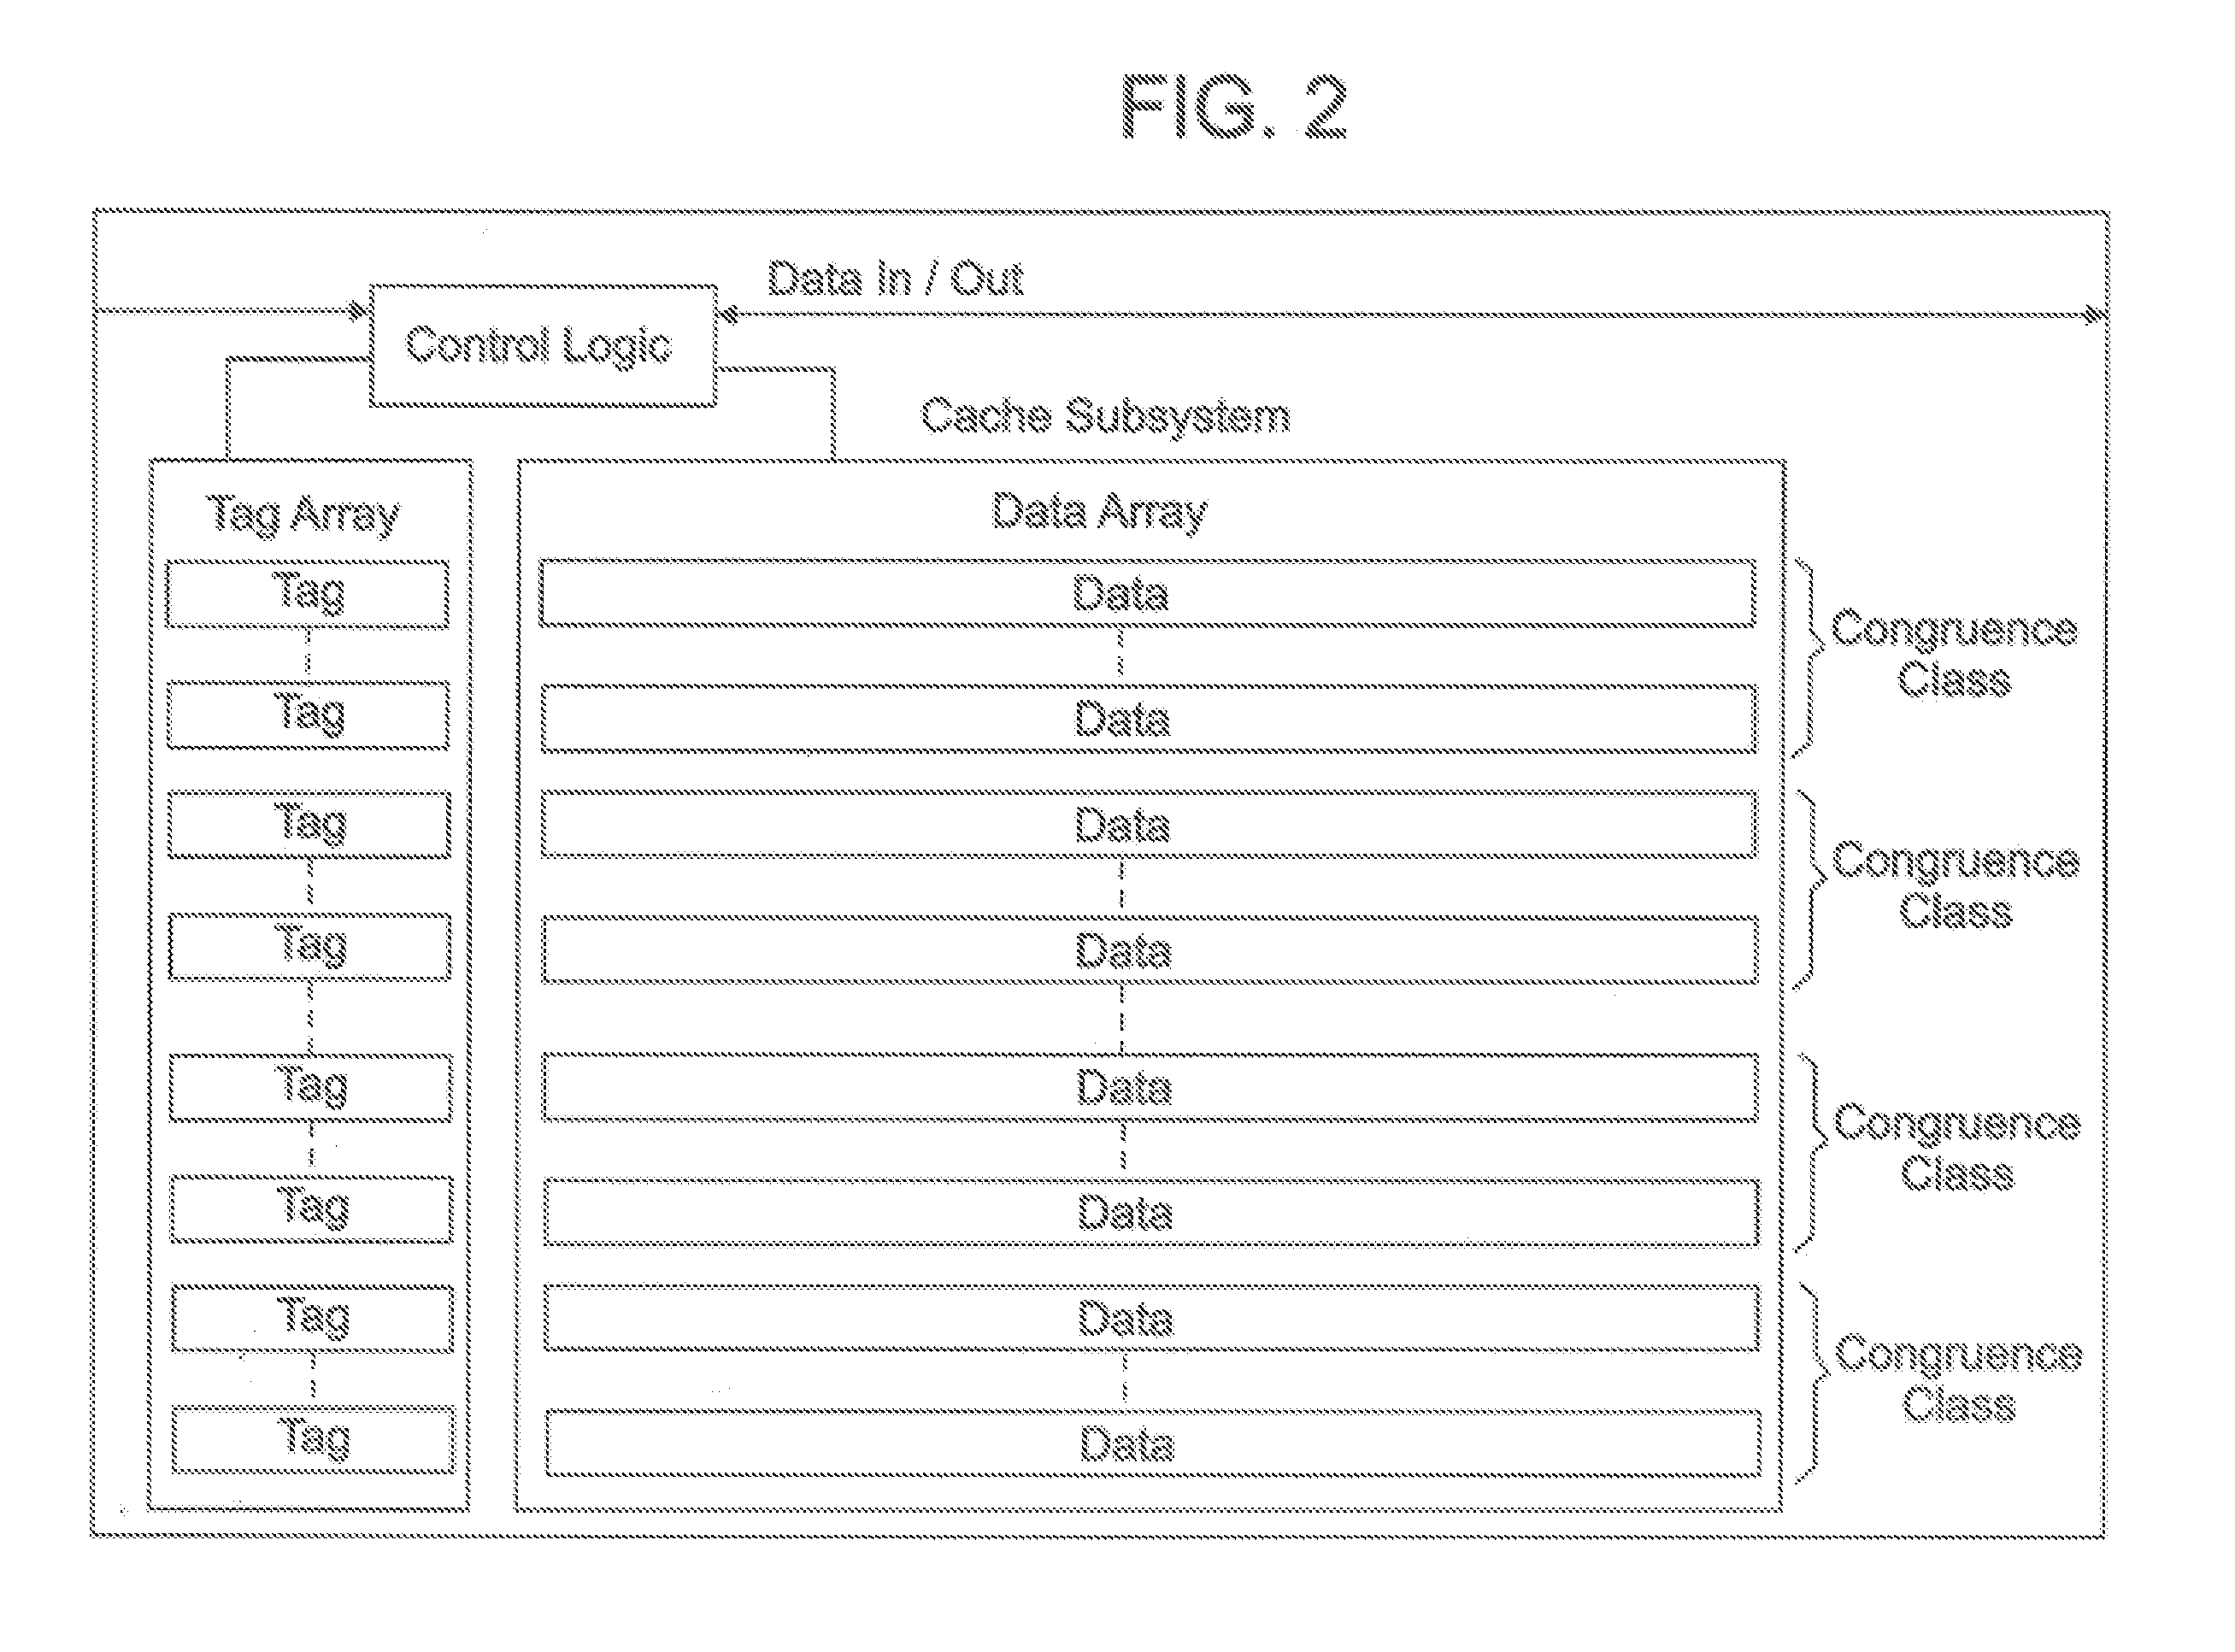 Apparatus and Method for Cache Maintenance